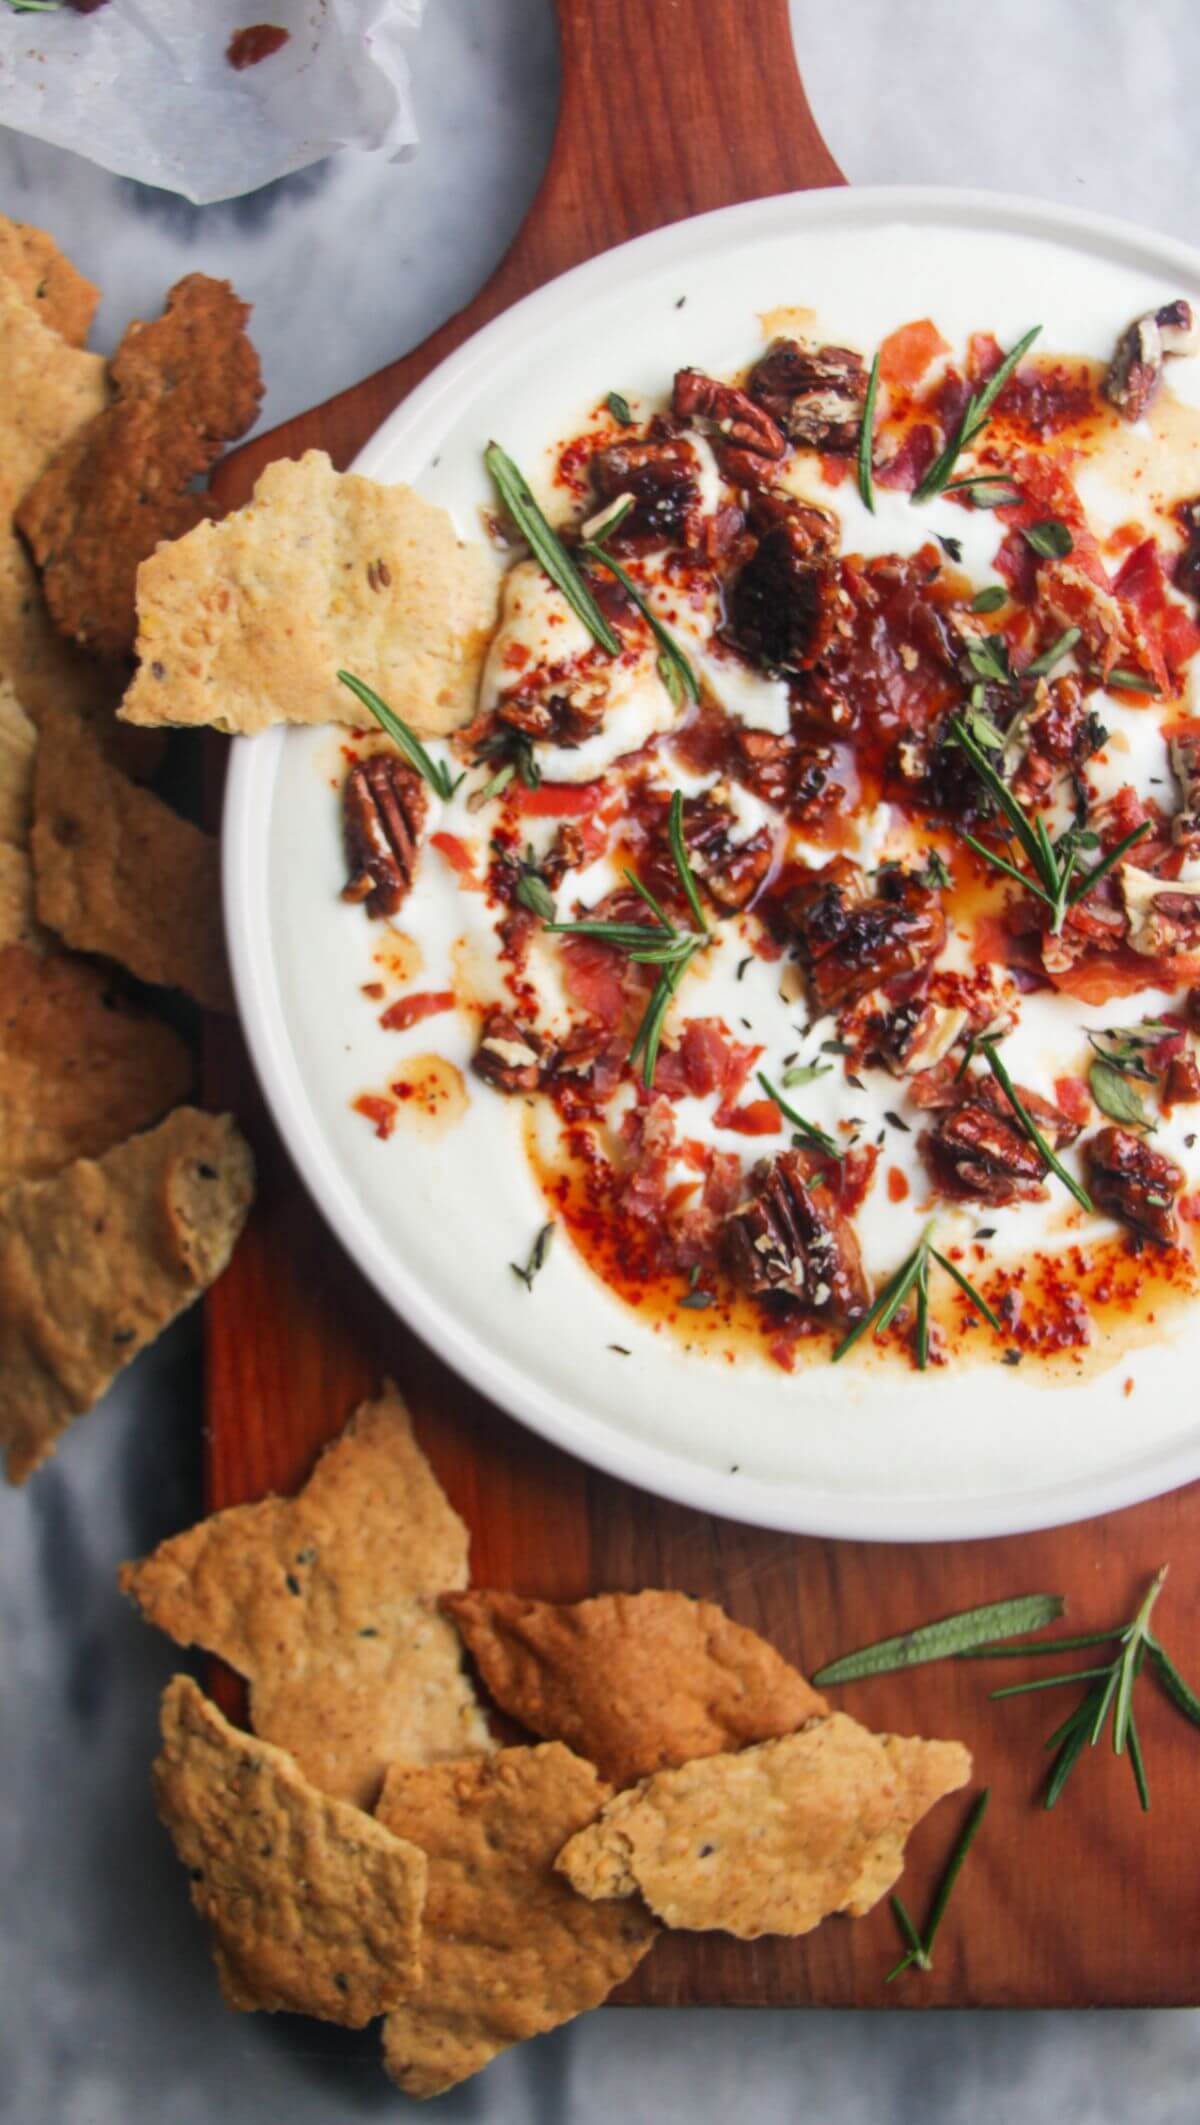 Whipped feta dip topping with hot honey and crispy prosciutto shards on a white plate with crackers on the side.